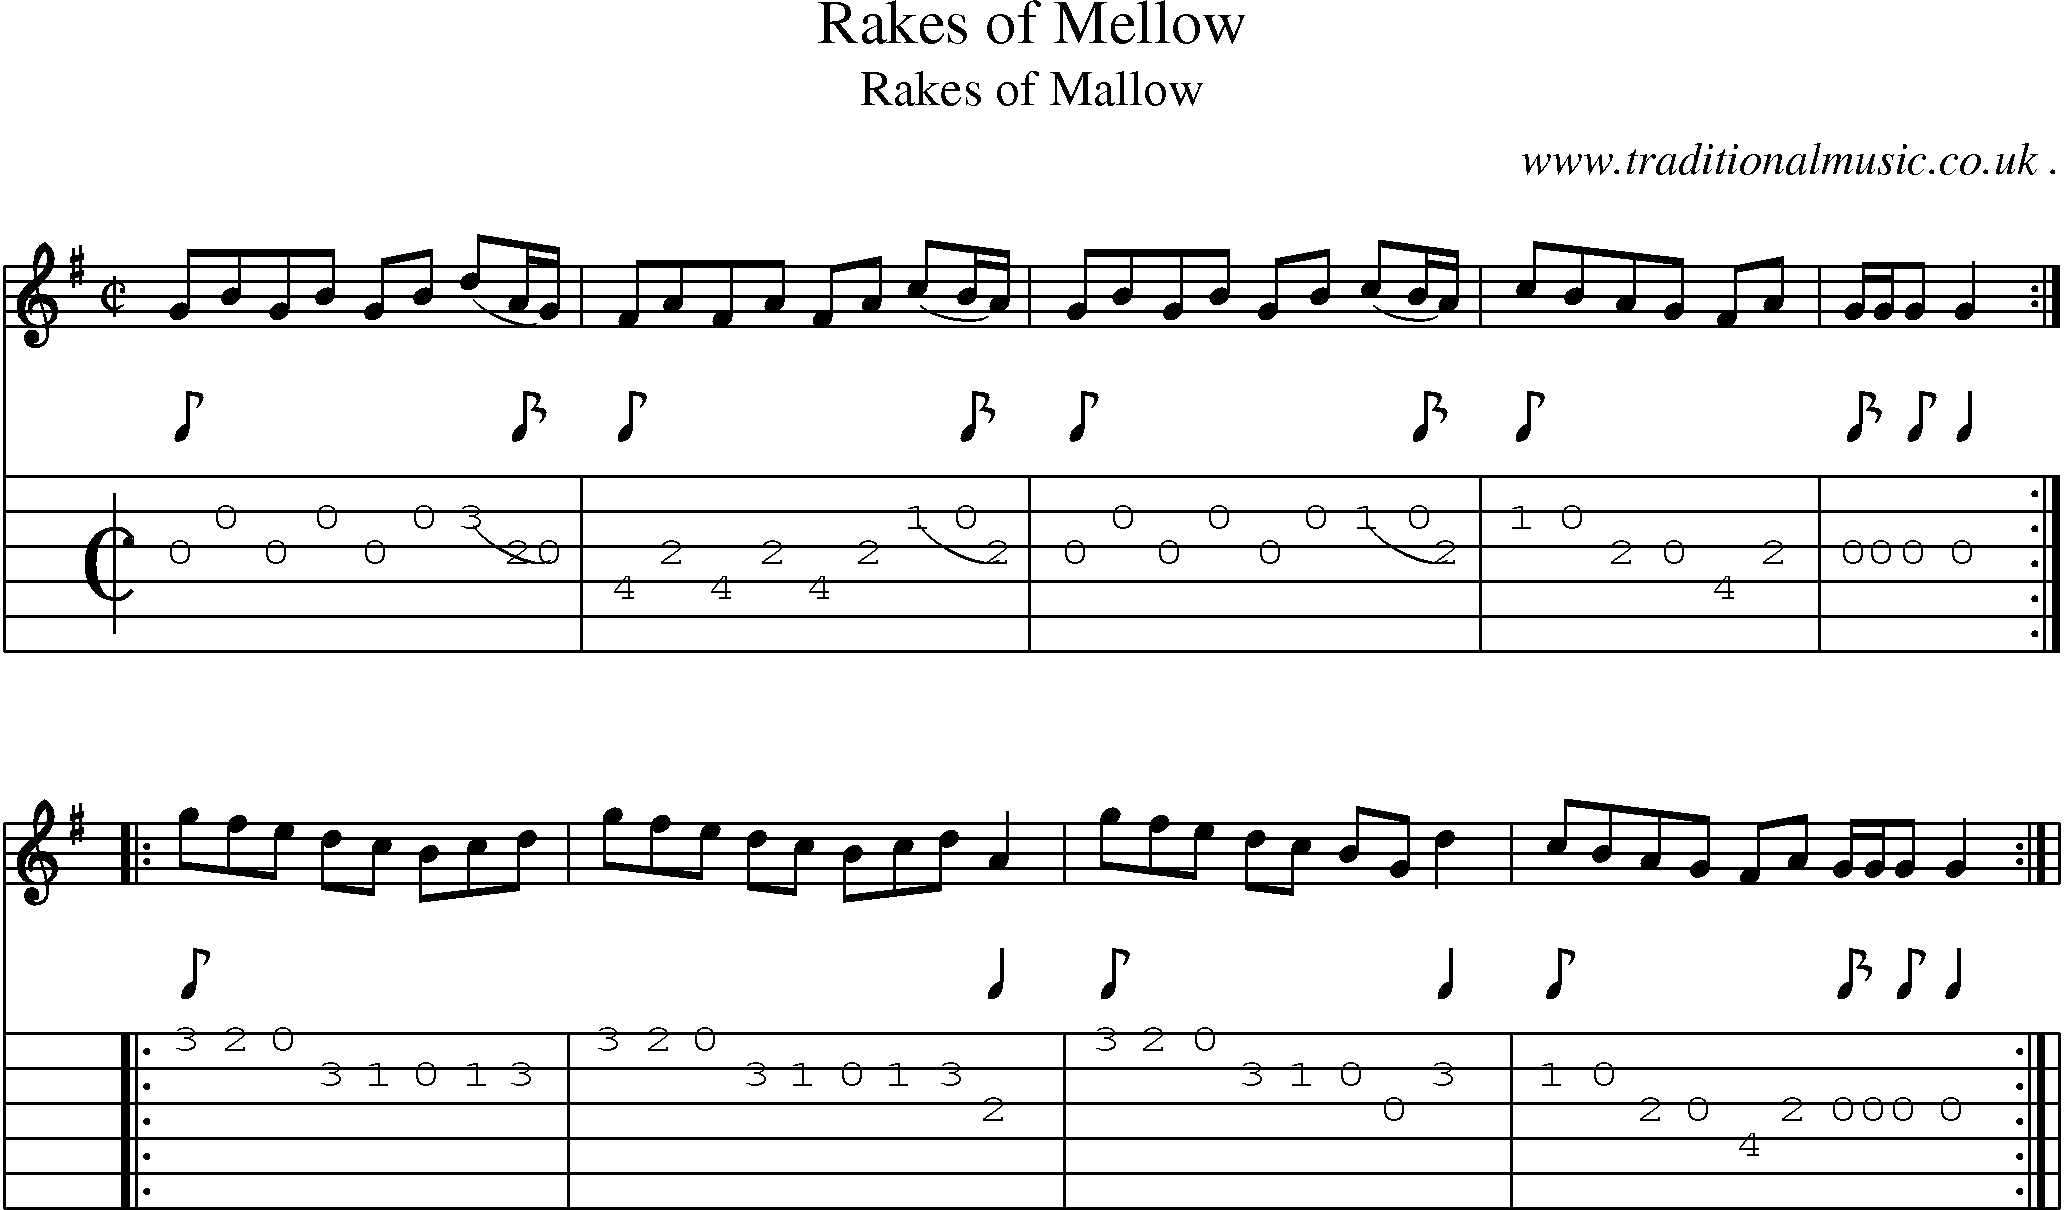 Sheet-Music and Guitar Tabs for Rakes Of Mellow